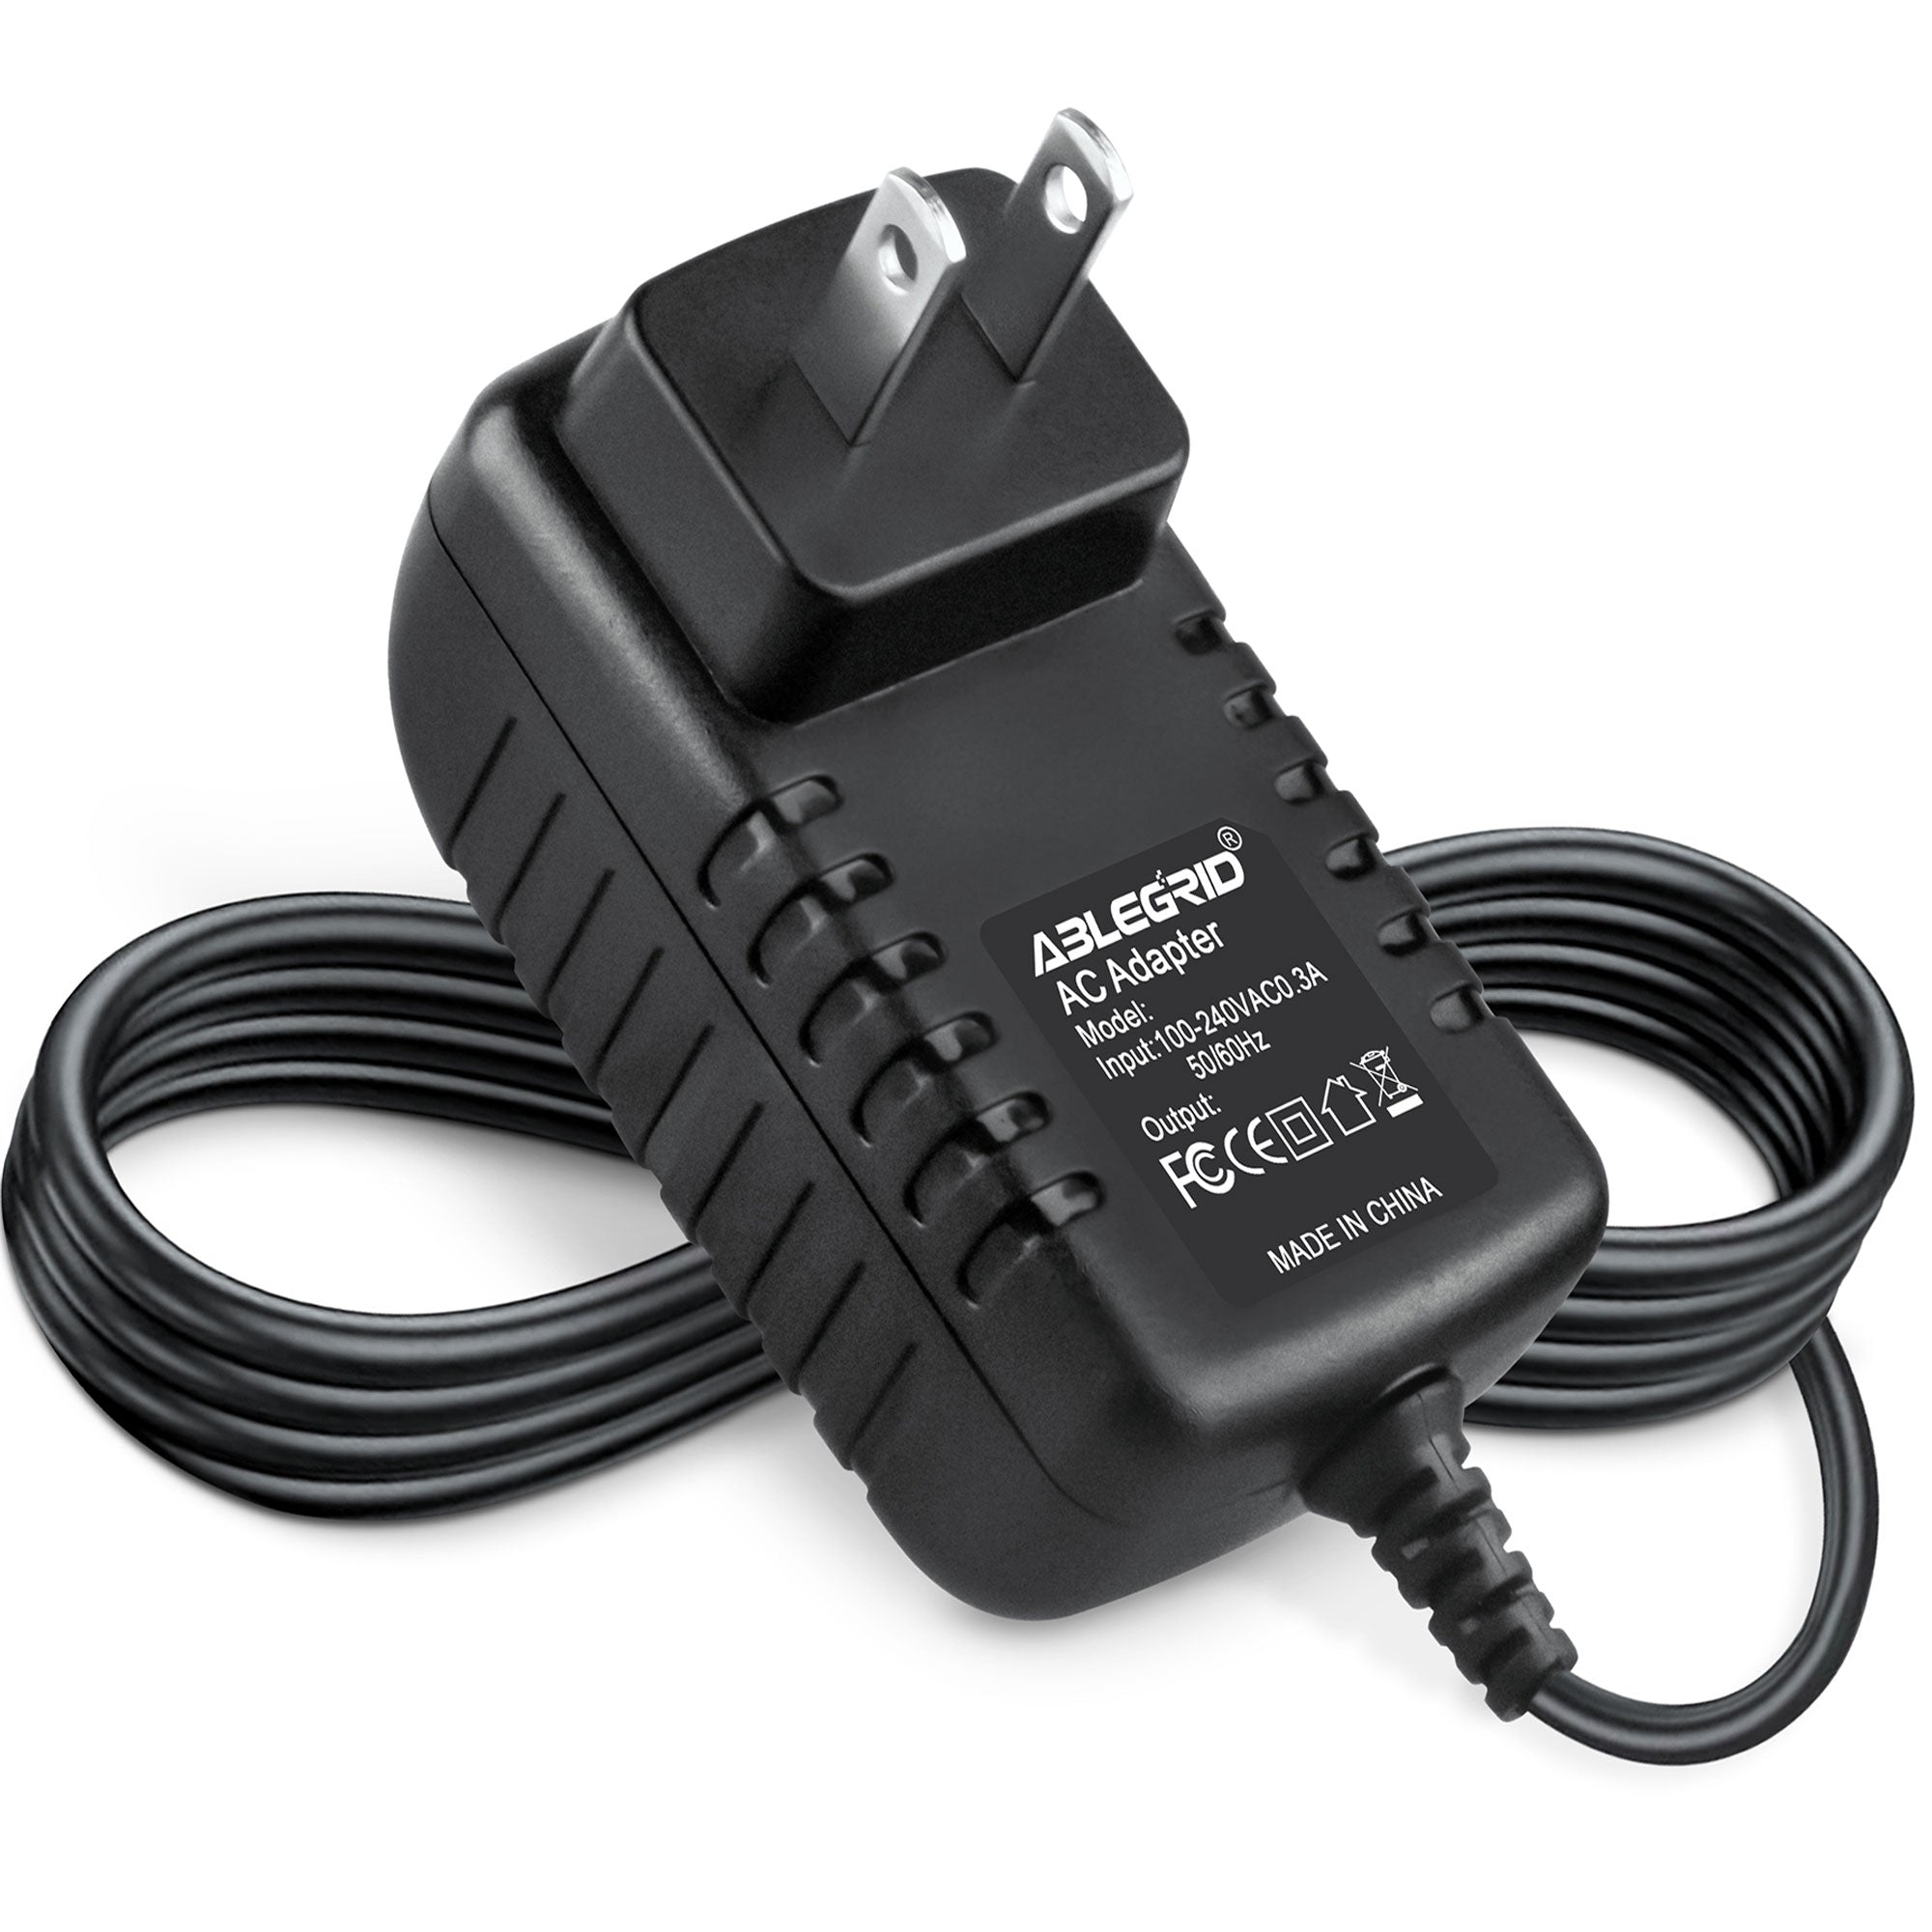 AbleGrid AC-DC Adapter for FAIRWAY Model: WRG15F-120B WRG15F120B Switching Power Supply Cord Cable PS Wall Home Charger Input: 100 - 240 VAC 50/60Hz Worldwide Voltage Use Mains PSU